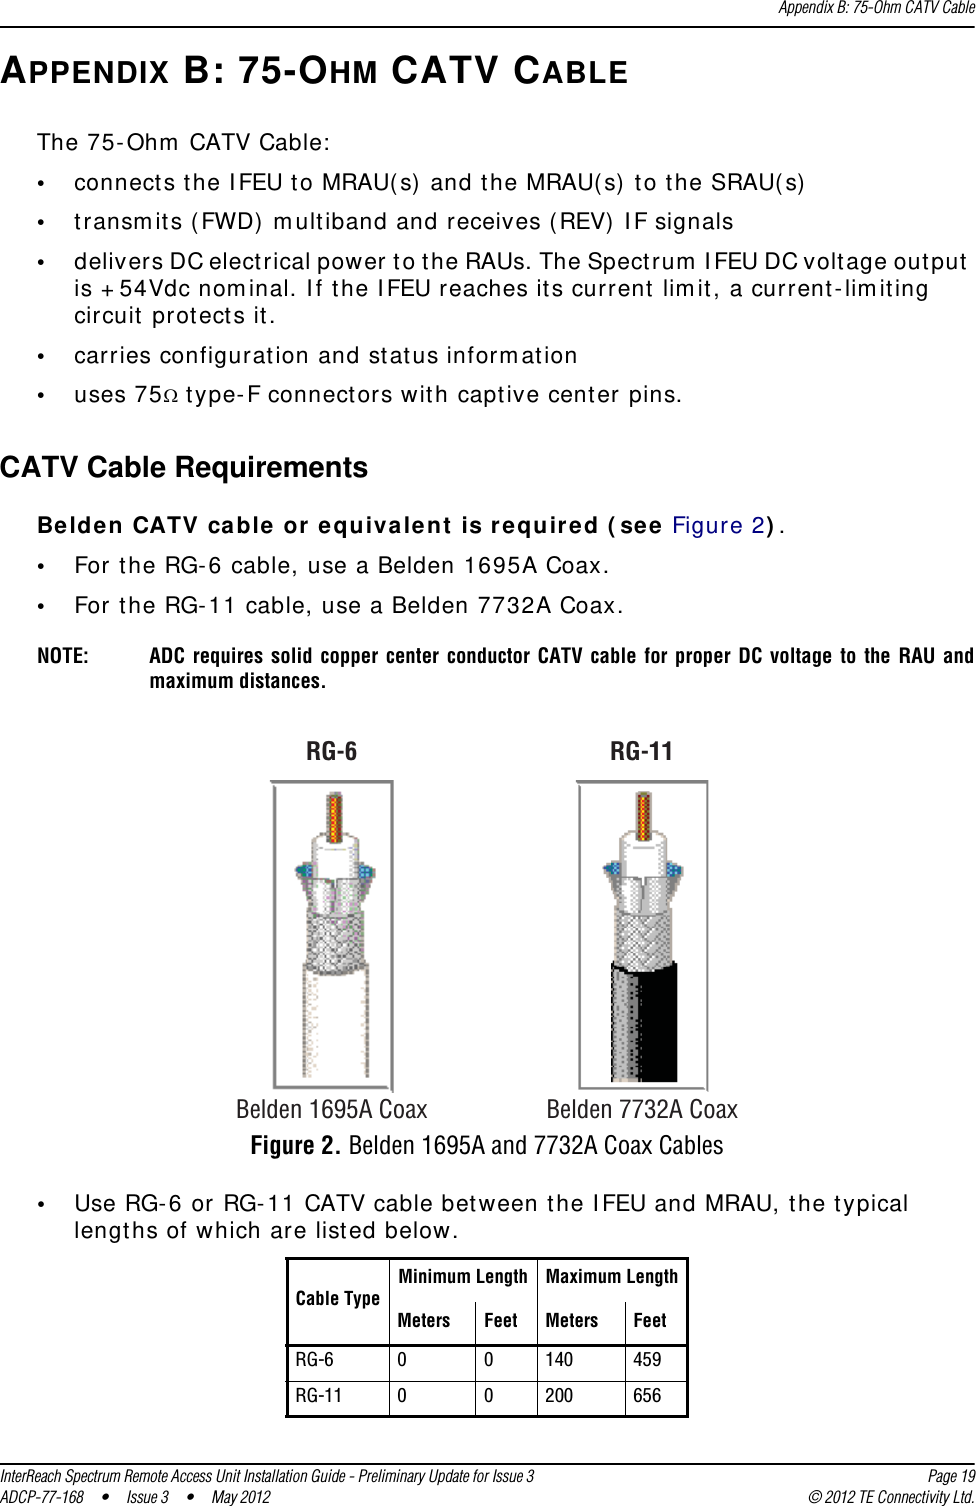 Appendix B: 75-Ohm CATV CableInterReach Spectrum Remote Access Unit Installation Guide - Preliminary Update for Issue 3 Page 19ADCP-77-168 • Issue 3 • May 2012 © 2012 TE Connectivity Ltd.APPENDIX B: 75-OHM CATV CABLEThe 75-Ohm CATV Cable:•connects the IFEU to MRAU(s) and the MRAU(s) to the SRAU(s)•transmits (FWD) multiband and receives (REV) IF signals•delivers DC electrical power to the RAUs. The Spectrum IFEU DC voltage output is +54Vdc nominal. If the IFEU reaches its current limit, a current-limiting circuit protects it.•carries configuration and status information•uses 75 type-F connectors with captive center pins.CATV Cable RequirementsBelden CATV cable or equivalent is required (see Figure 2).•For the RG-6 cable, use a Belden 1695A Coax.•For the RG-11 cable, use a Belden 7732A Coax.RG-11Belden 1695A CoaxRG-6Belden 7732A CoaxNOTE: ADC requires solid copper center conductor CATV cable for proper DC voltage to the RAU and maximum distances.Figure 2. Belden 1695A and 7732A Coax Cables•Use RG-6 or RG-11 CATV cable between the IFEU and MRAU, the typical lengths of which are listed below.Cable TypeMinimum Length Maximum LengthMeters Feet Meters FeetRG-6 0 0 140 459RG-11 0 0 200 656